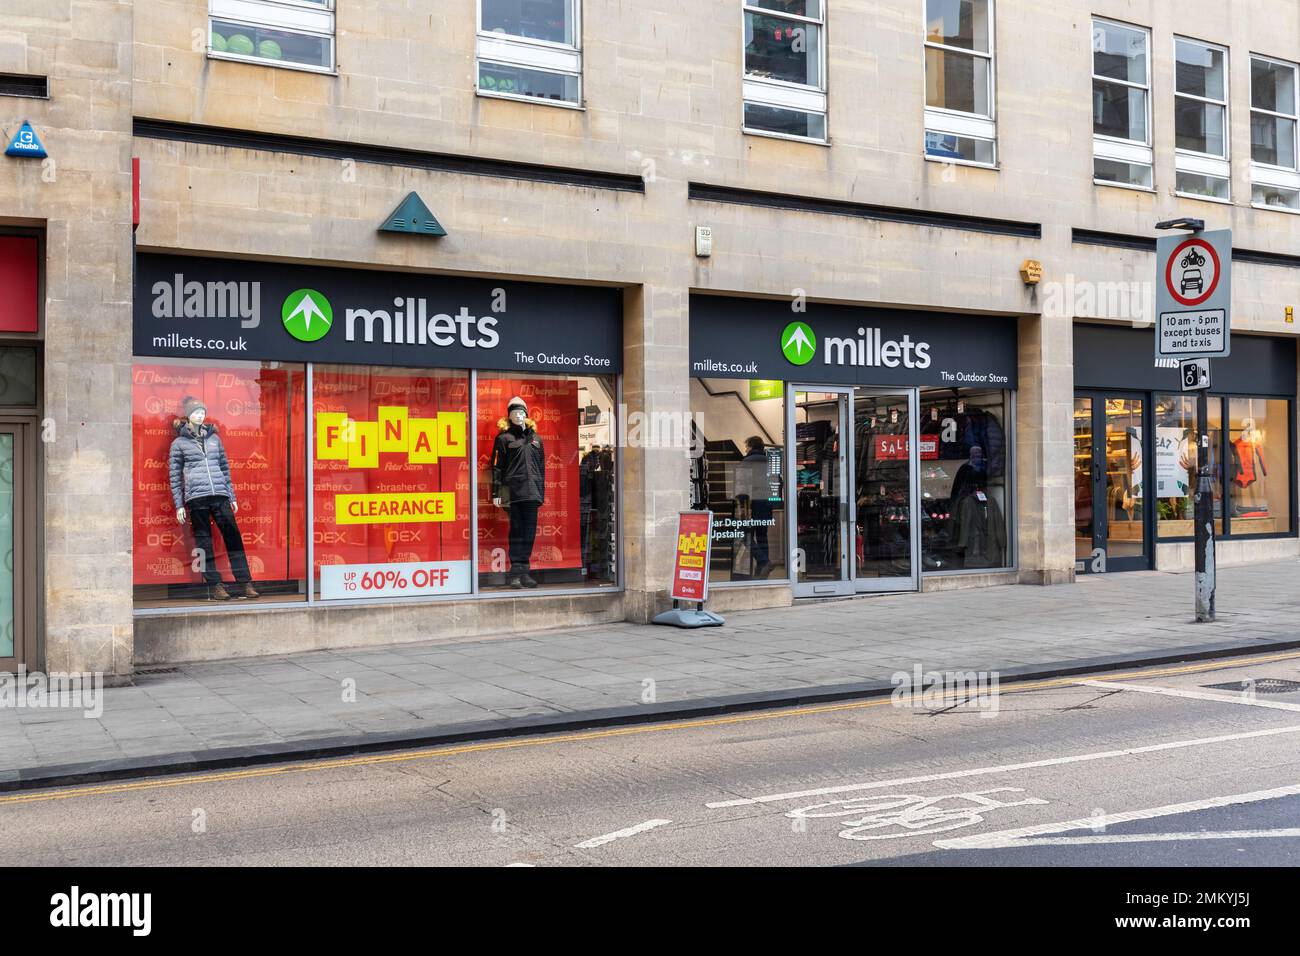 Final clearance sale at Millets Outdoor Retailer, Bath City centre, Somerset, England, UK Stock Photo